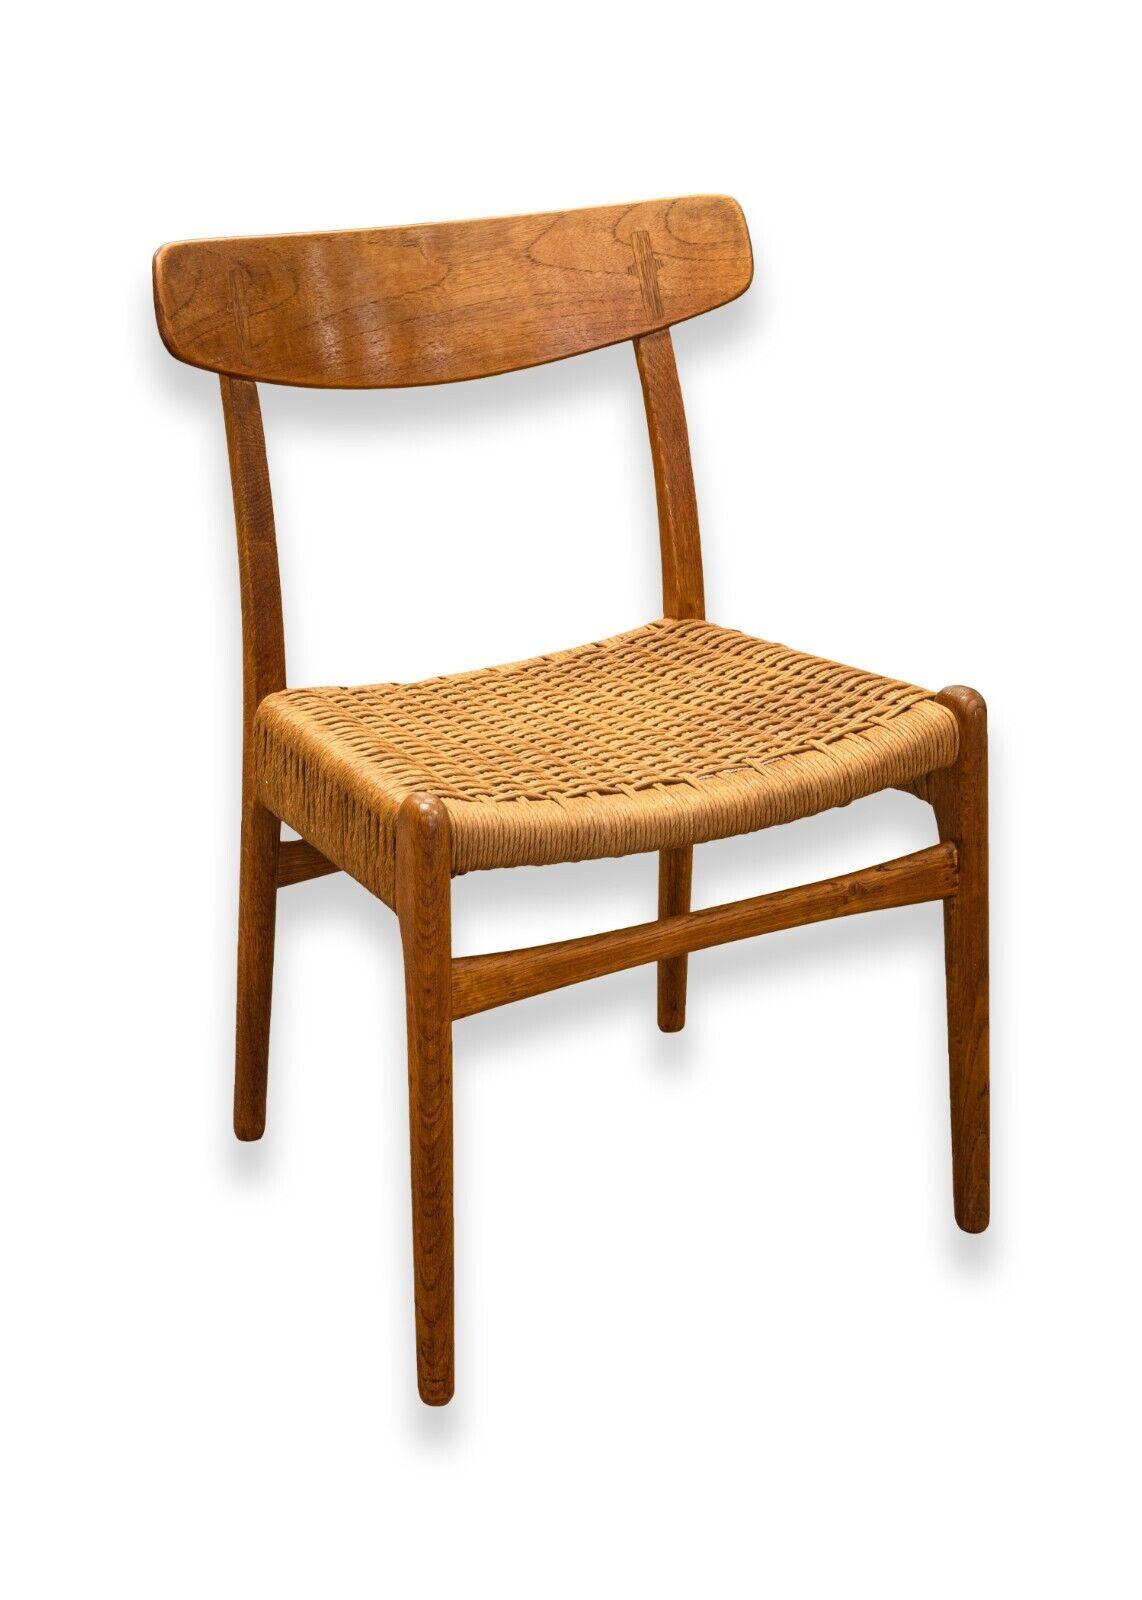 A set of 4 mid century modern Hans Wegner teak wood CH23 side dining chairs. This set of wonderful dining chairs are from legendary furniture designer Hans Wegner. These chairs feature a full teak wood construction, rattan seats, and a gorgeous